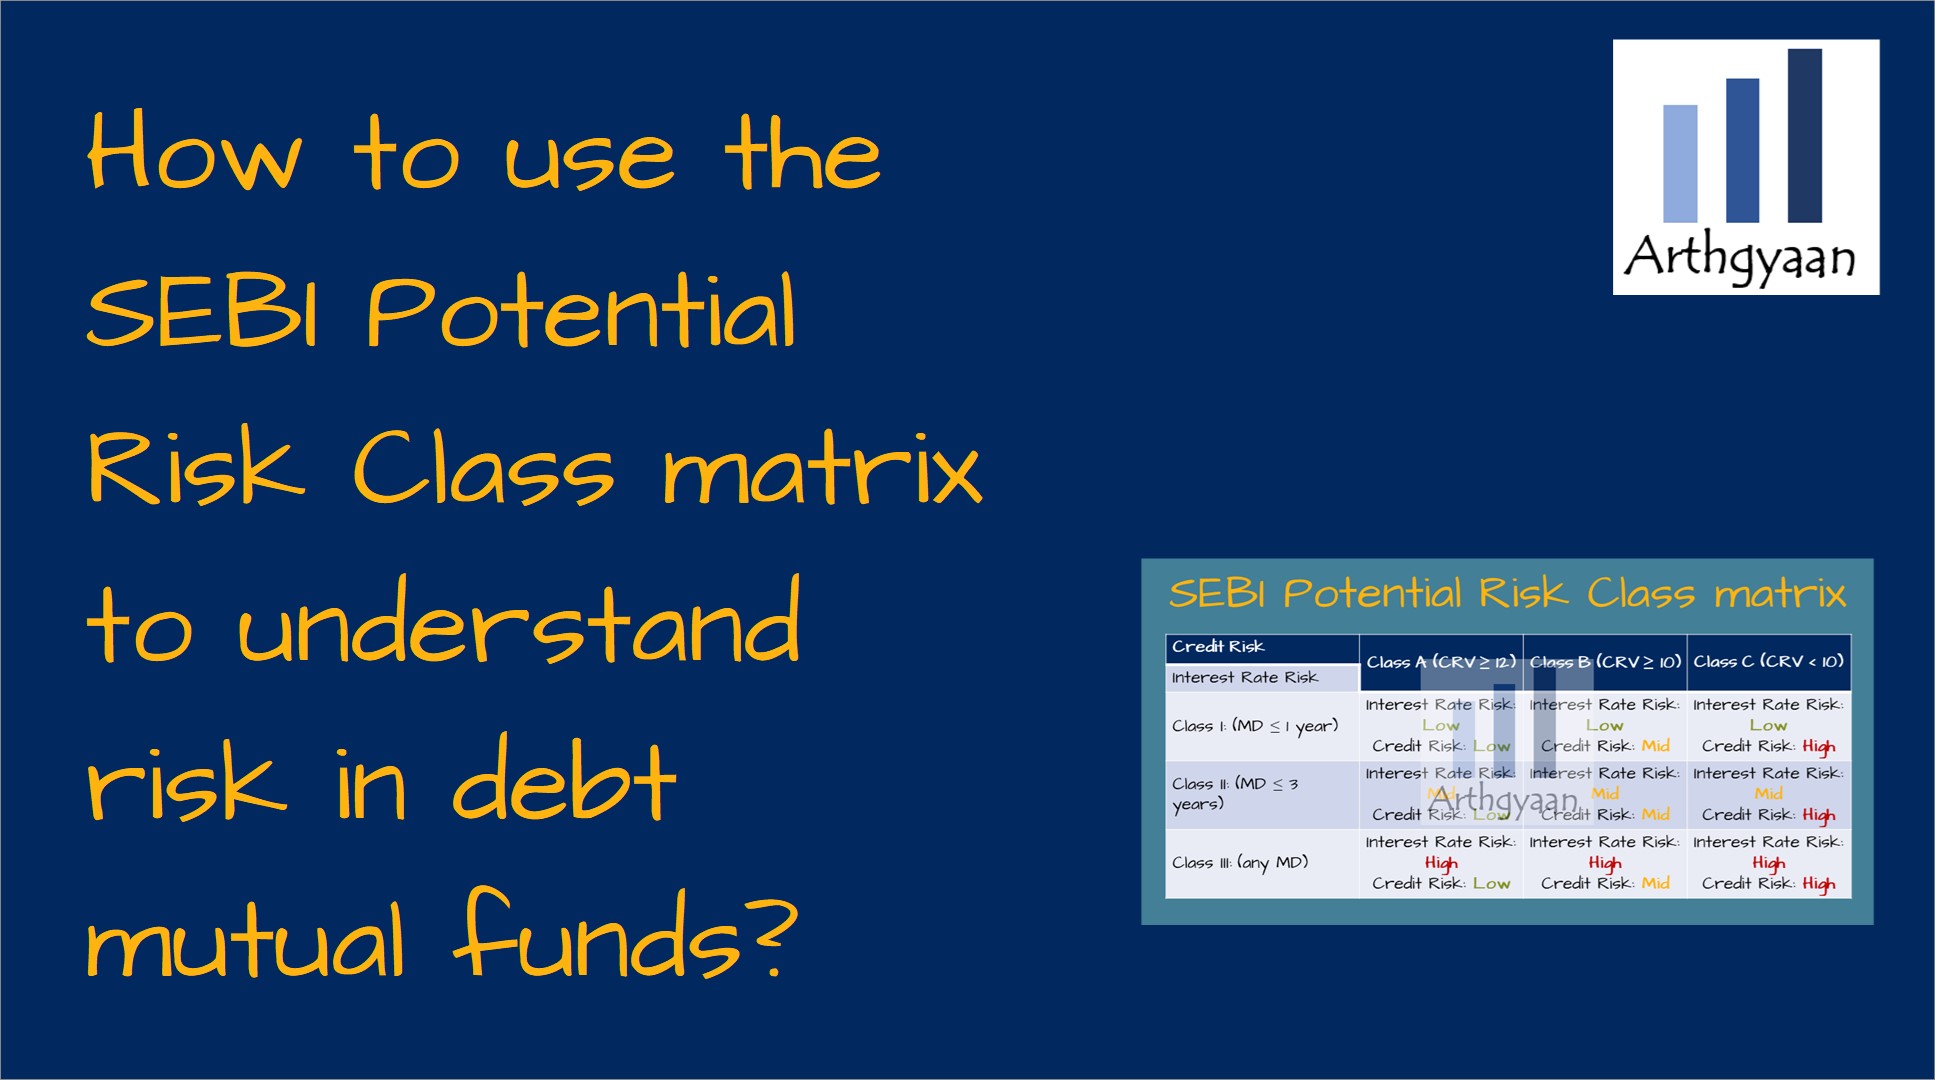 <p>This article shows you the way to understand the risk and return potential for debt mutual funds using a SEBI-mandated risk classification tool.</p>

